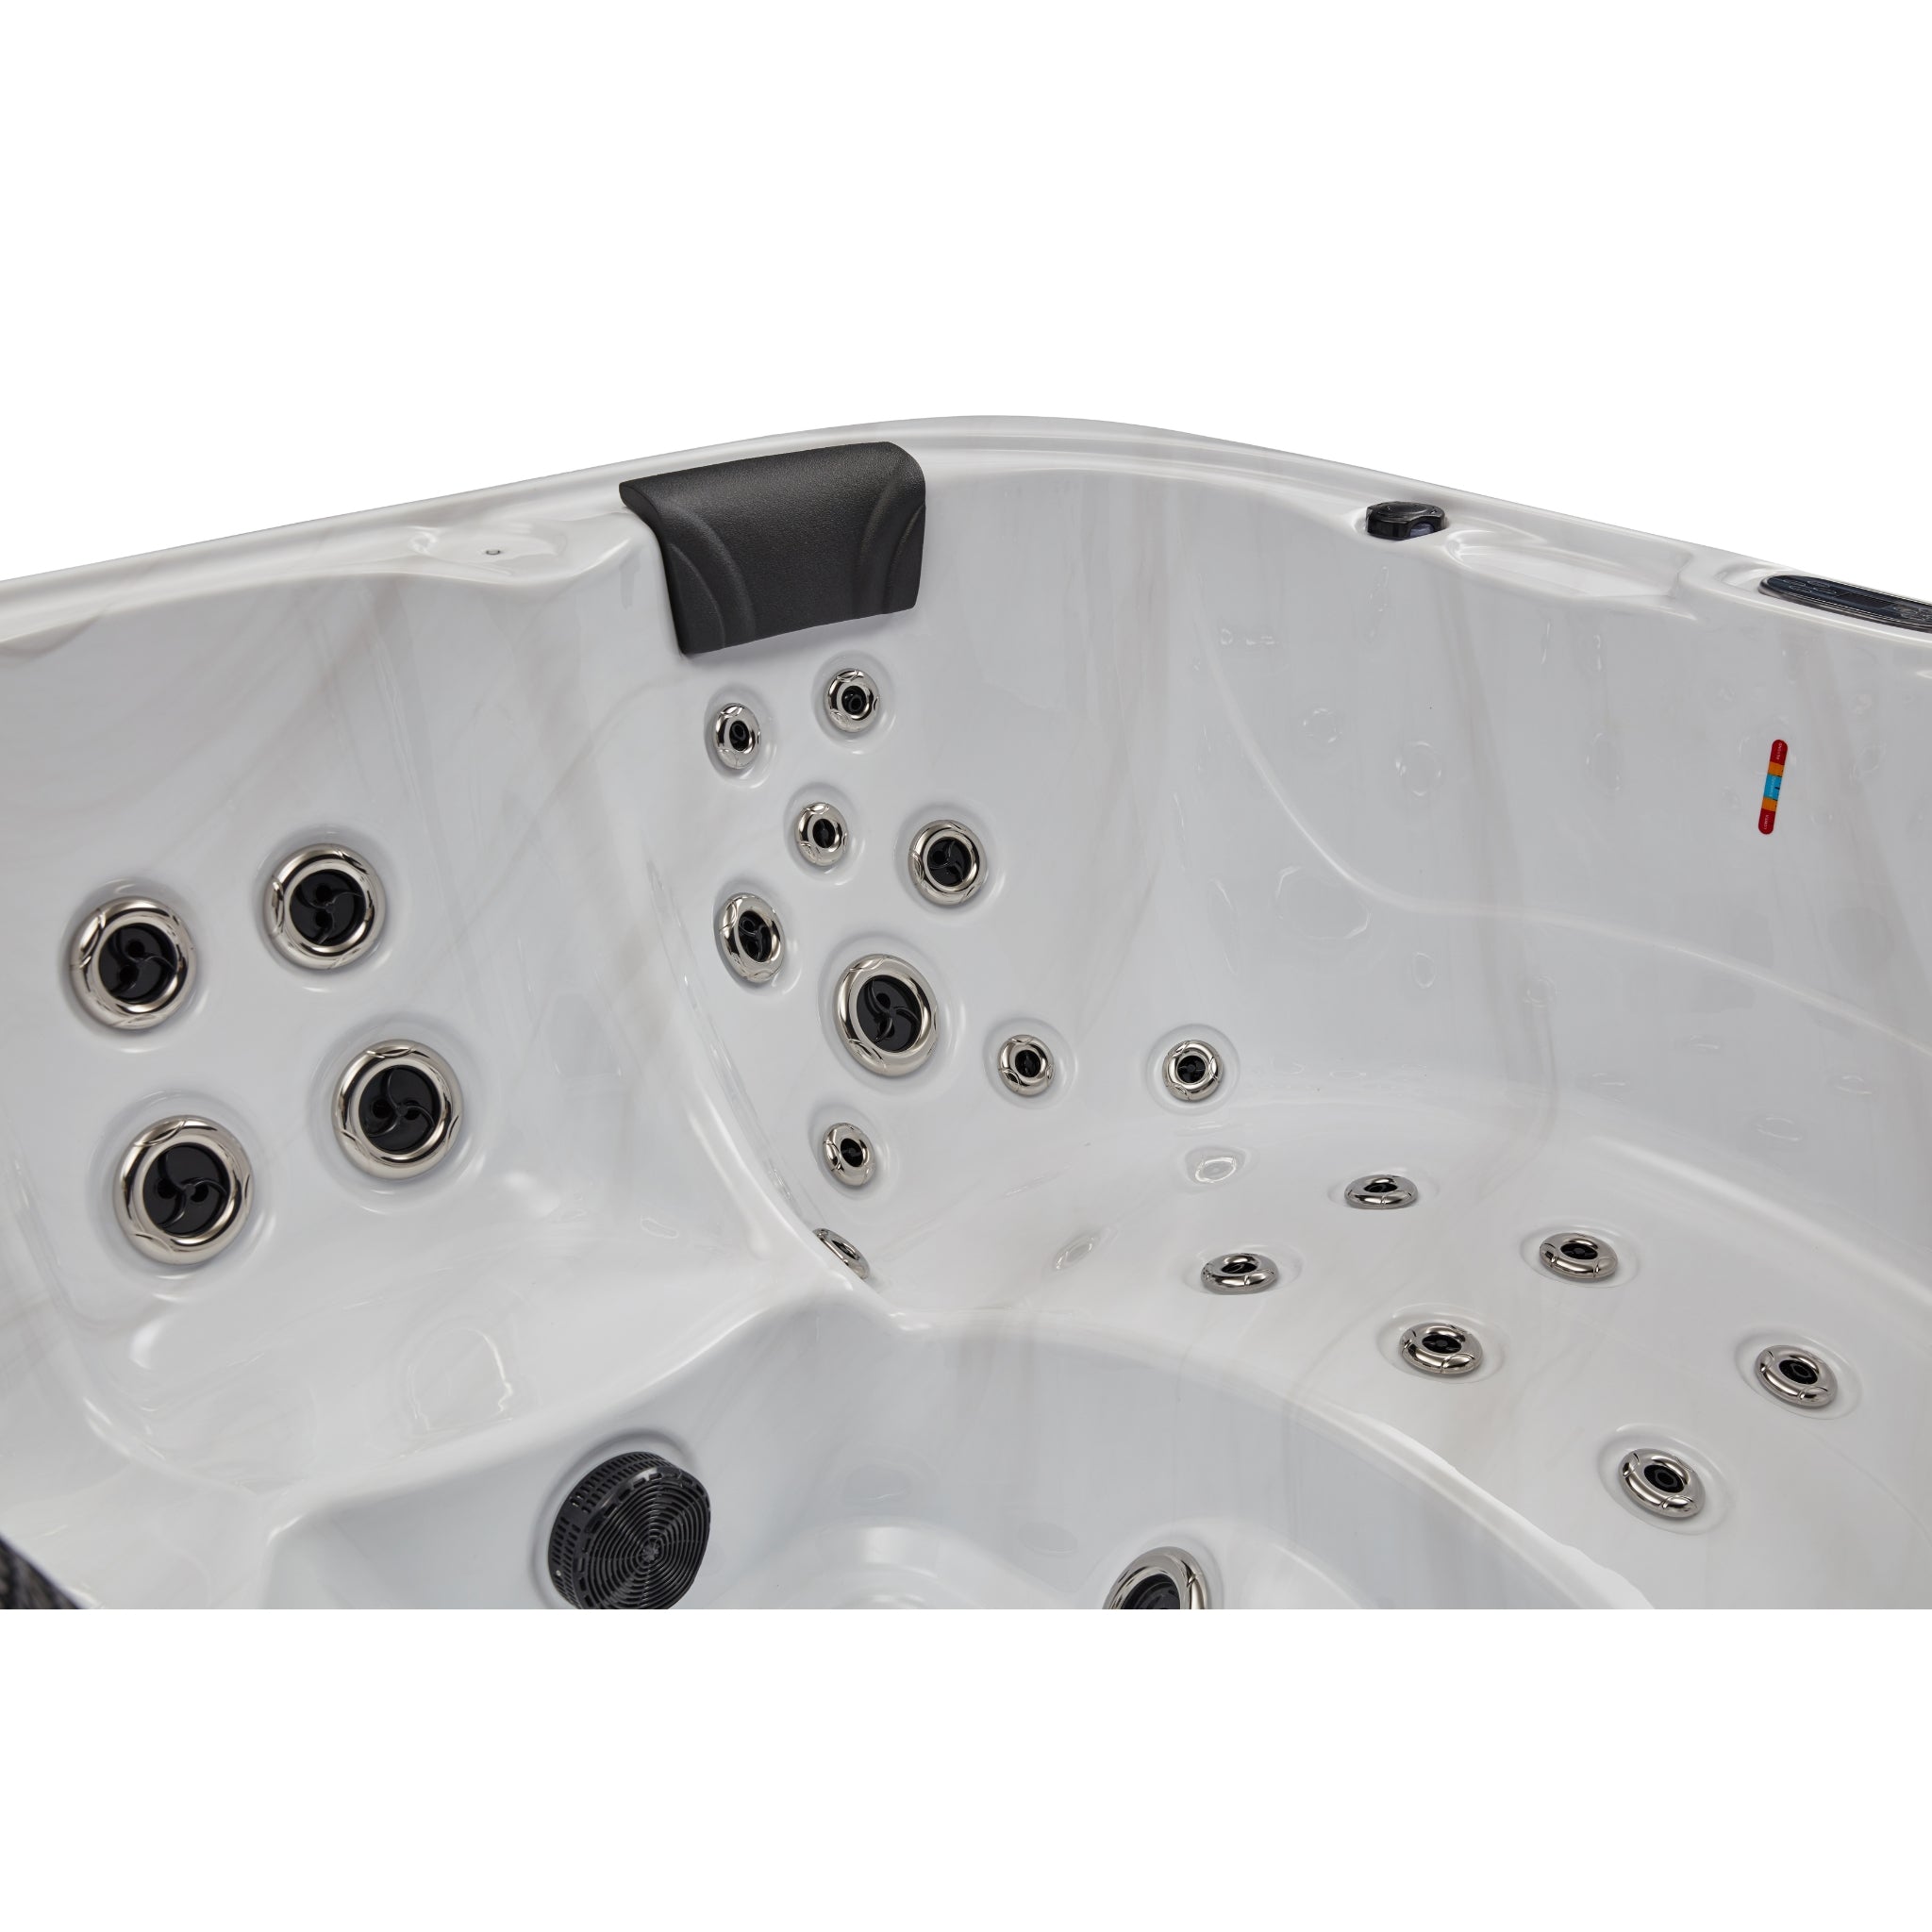 Victoria 6-Person Lounger hot Tub with Bluetooth